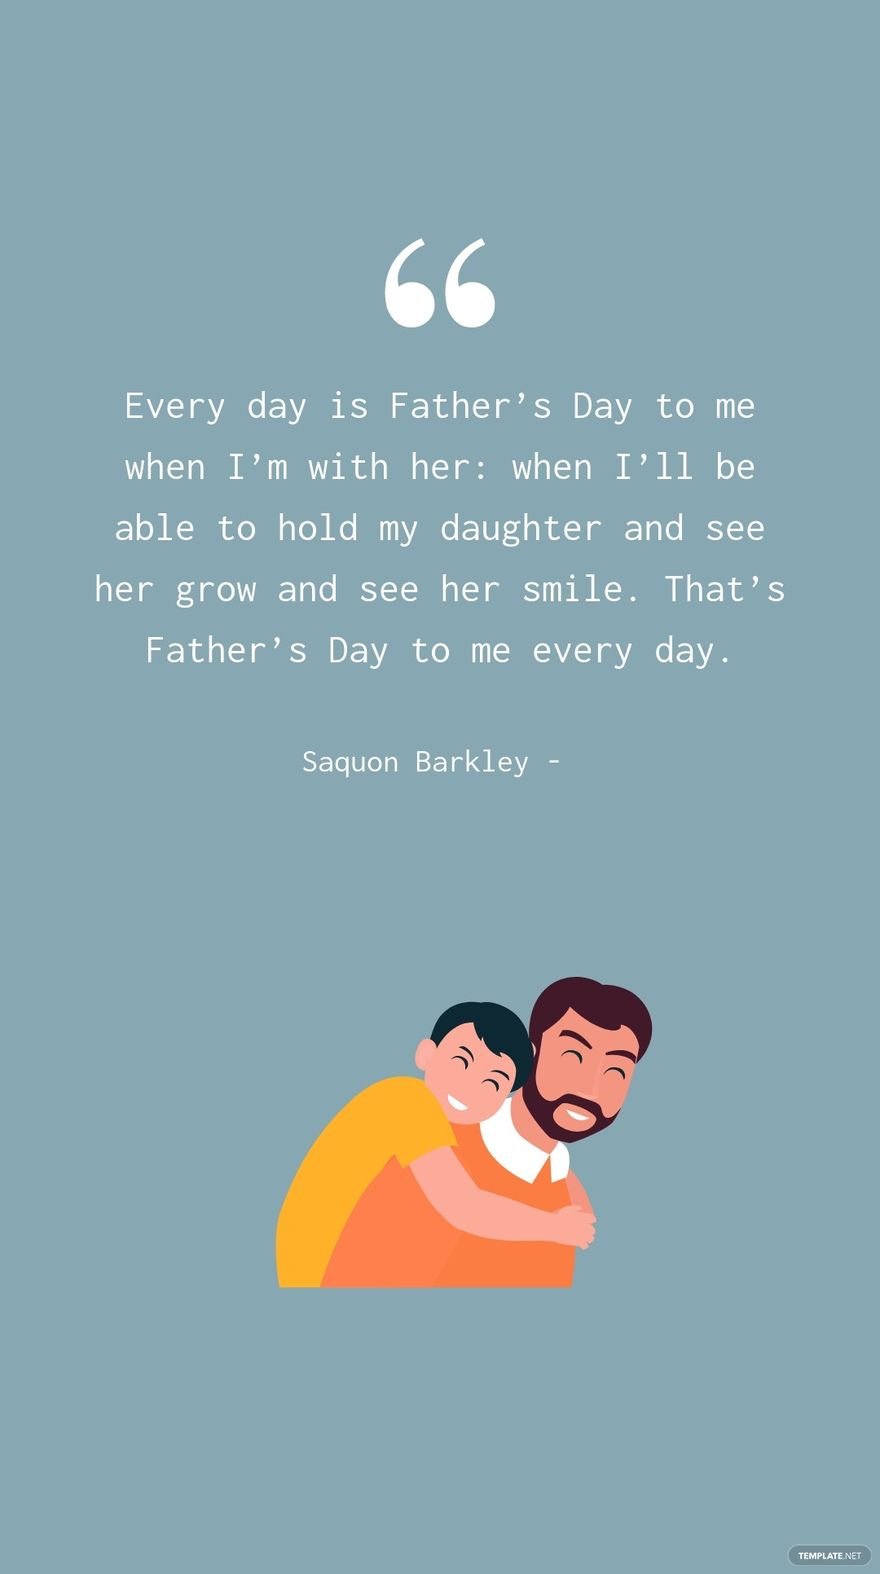 SAQUON BARKLEY - Every day is Father’s Day to me when I’m with her: when I’ll be able to hold my daughter and see her grow and see her smile. That’s Father’s Day to me every day.